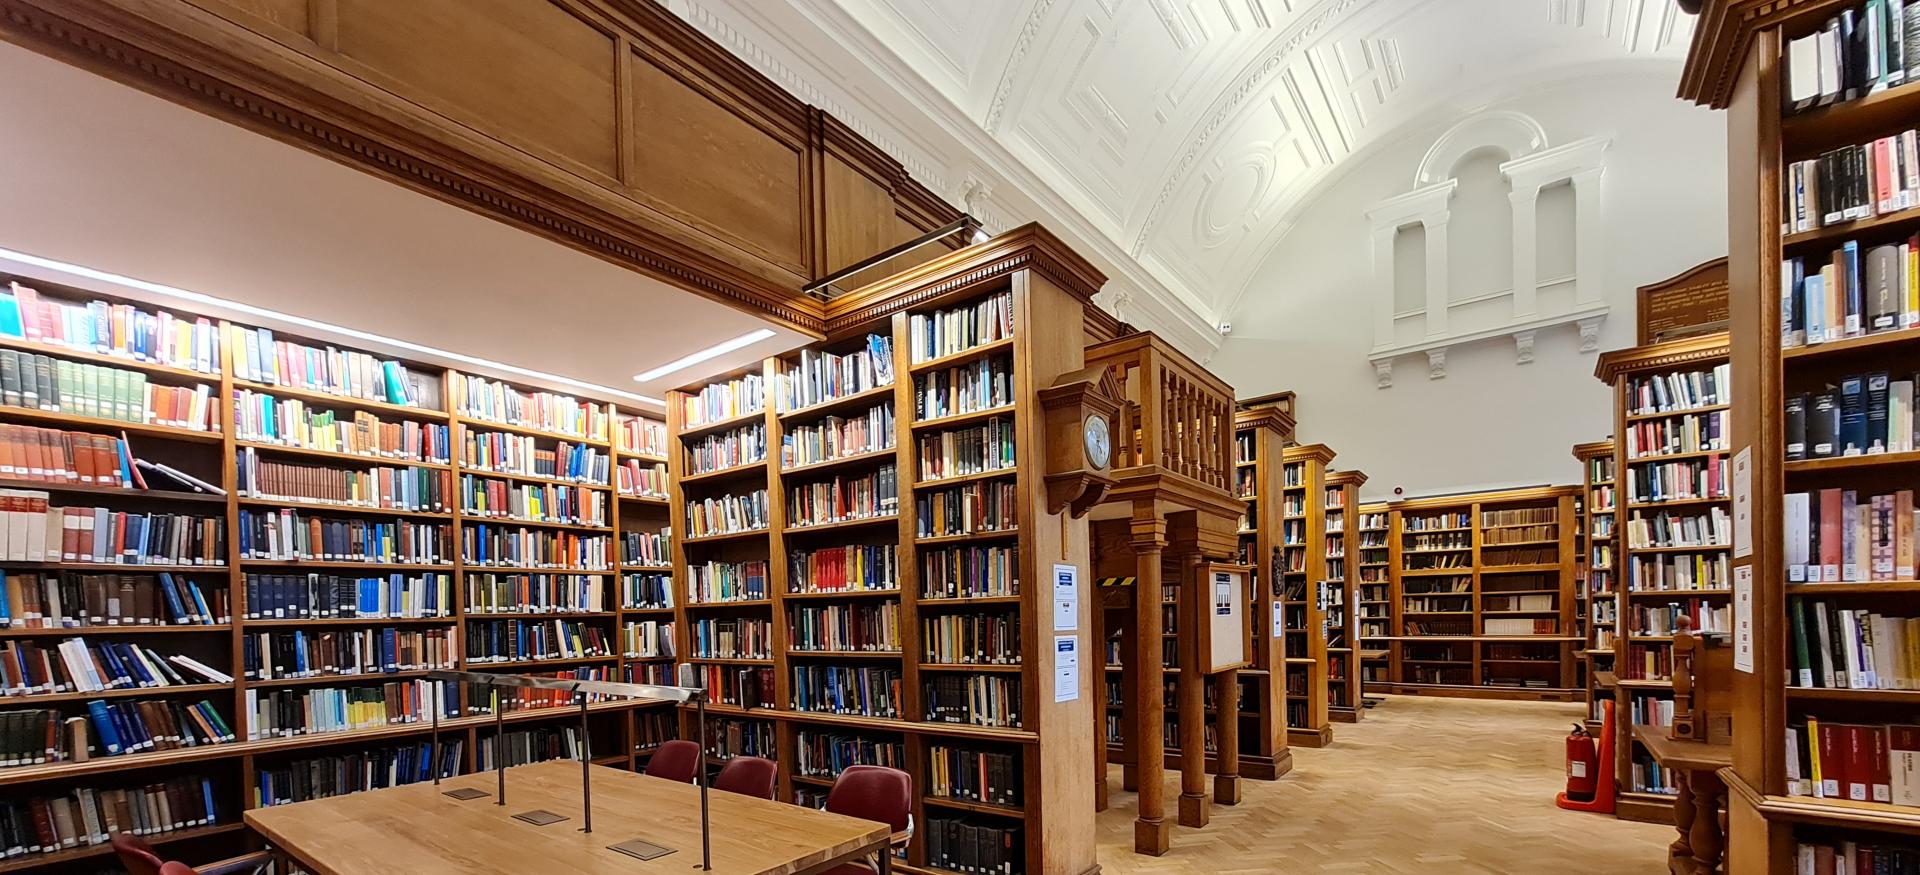 A view of the ground floor of Trinity's Warm Memorial Library.